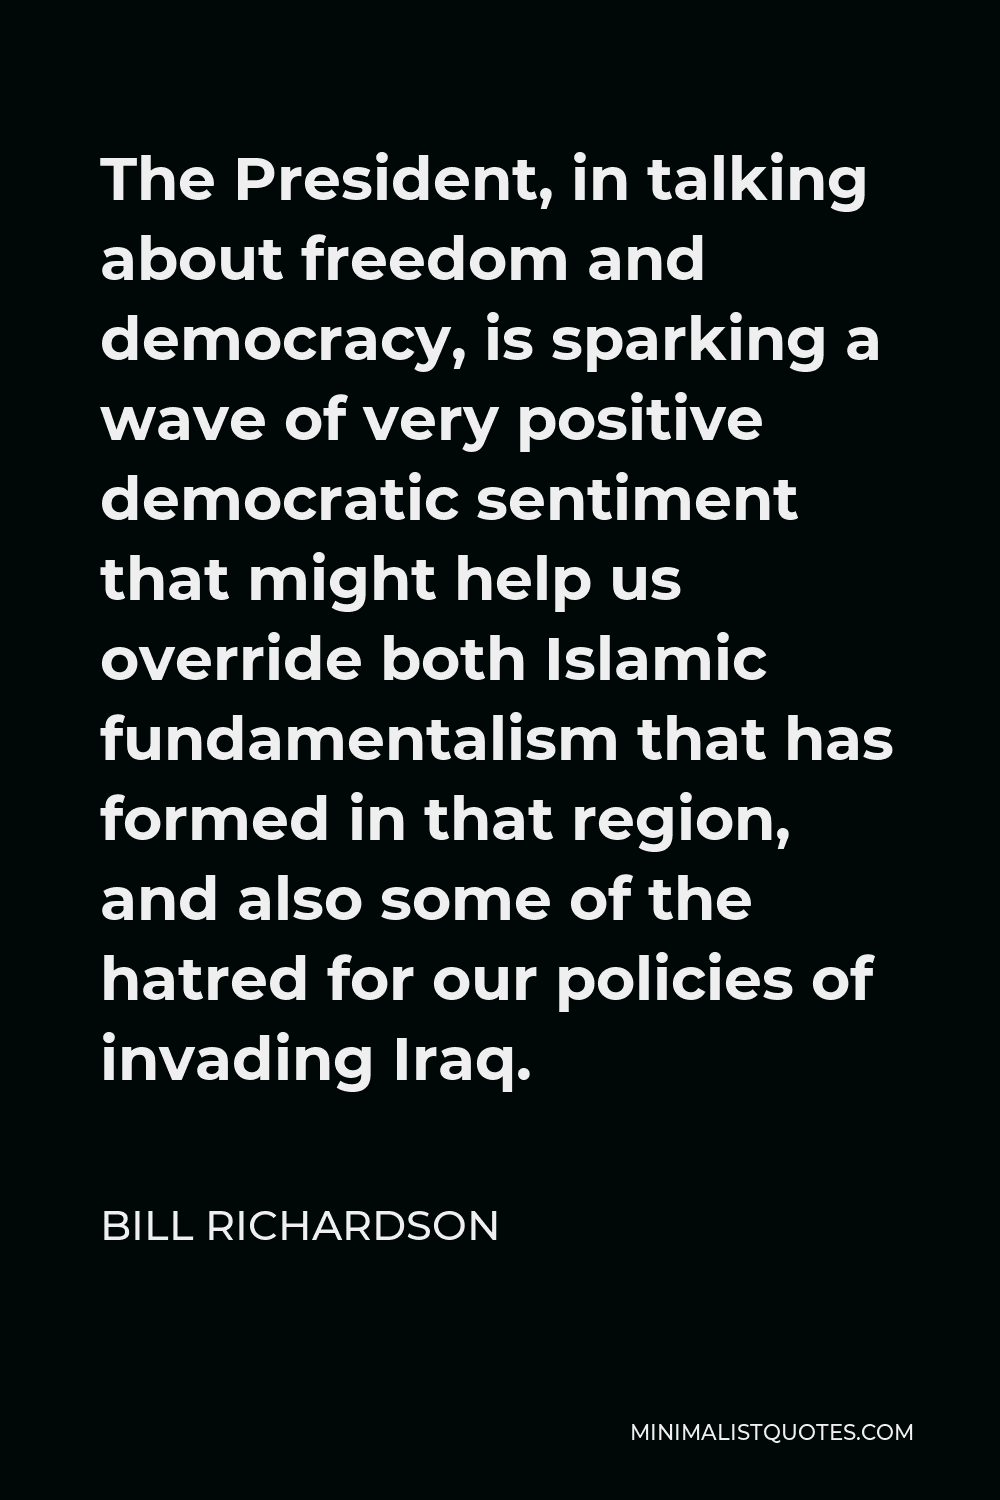 Bill Richardson Quote - The President, in talking about freedom and democracy, is sparking a wave of very positive democratic sentiment that might help us override both Islamic fundamentalism that has formed in that region, and also some of the hatred for our policies of invading Iraq.